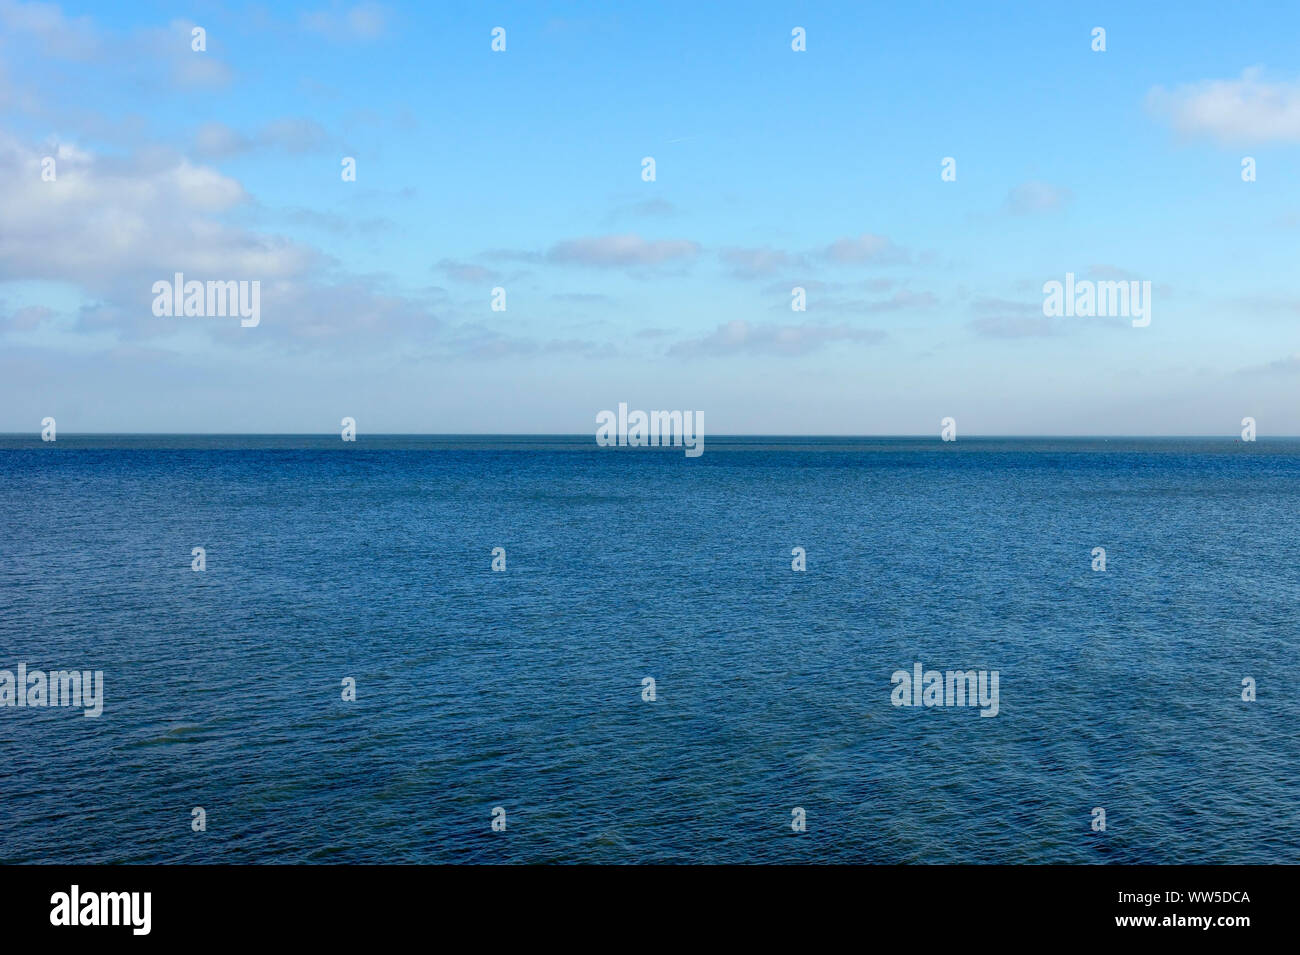 The horizon of a quiet sea in nice weather, Stock Photo